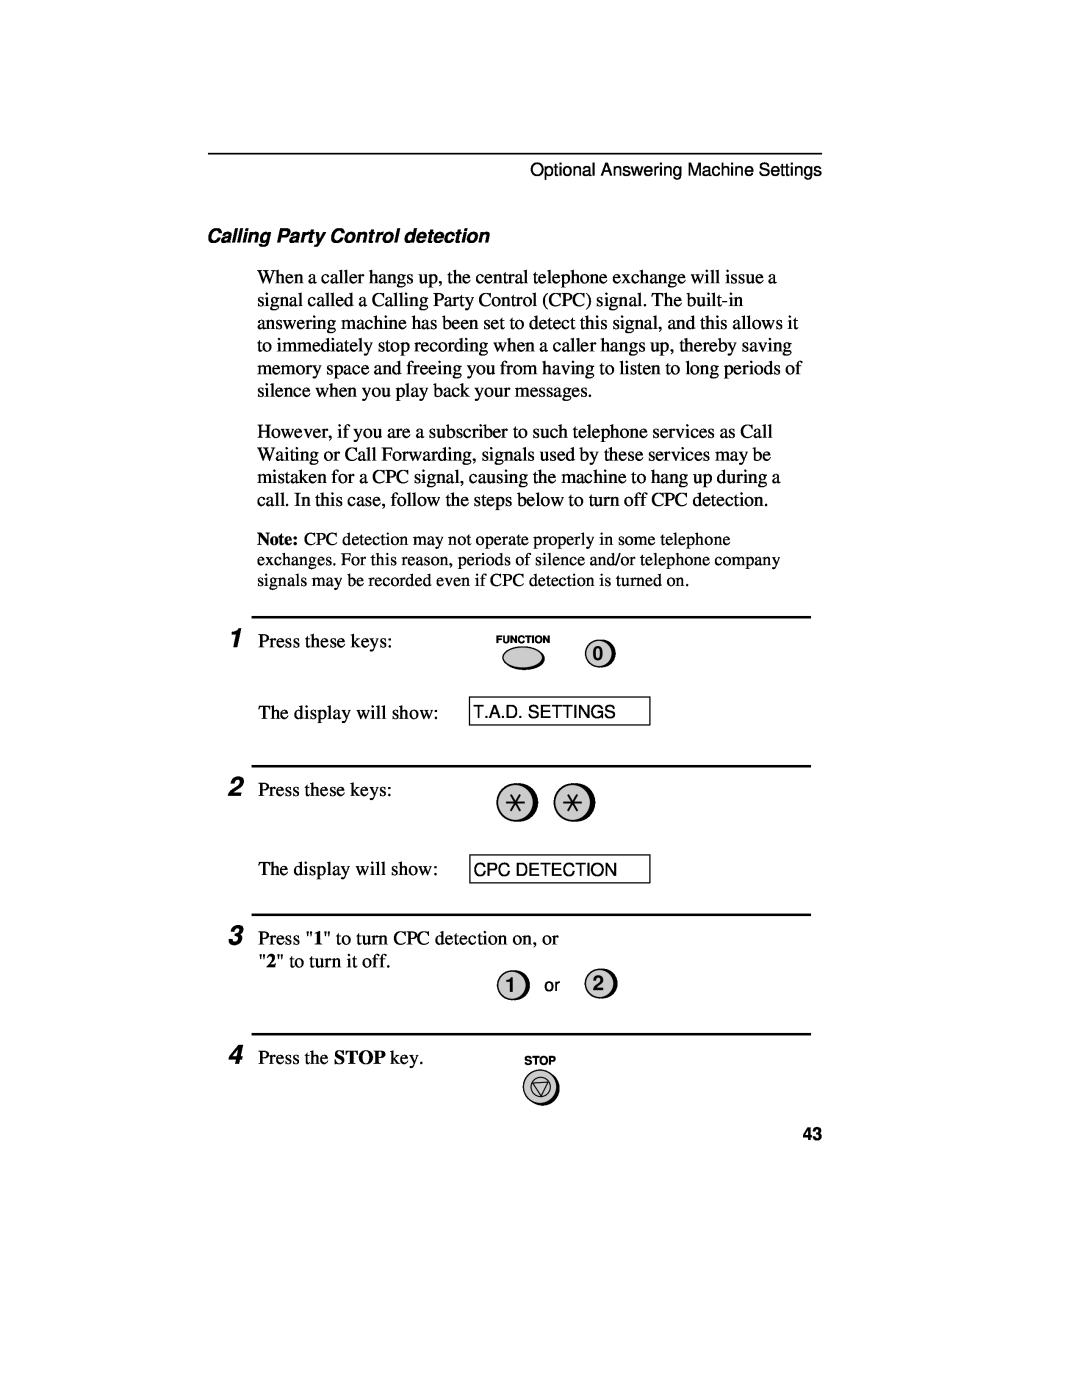 Sharp UX-460 operation manual 1 or, Calling Party Control detection 